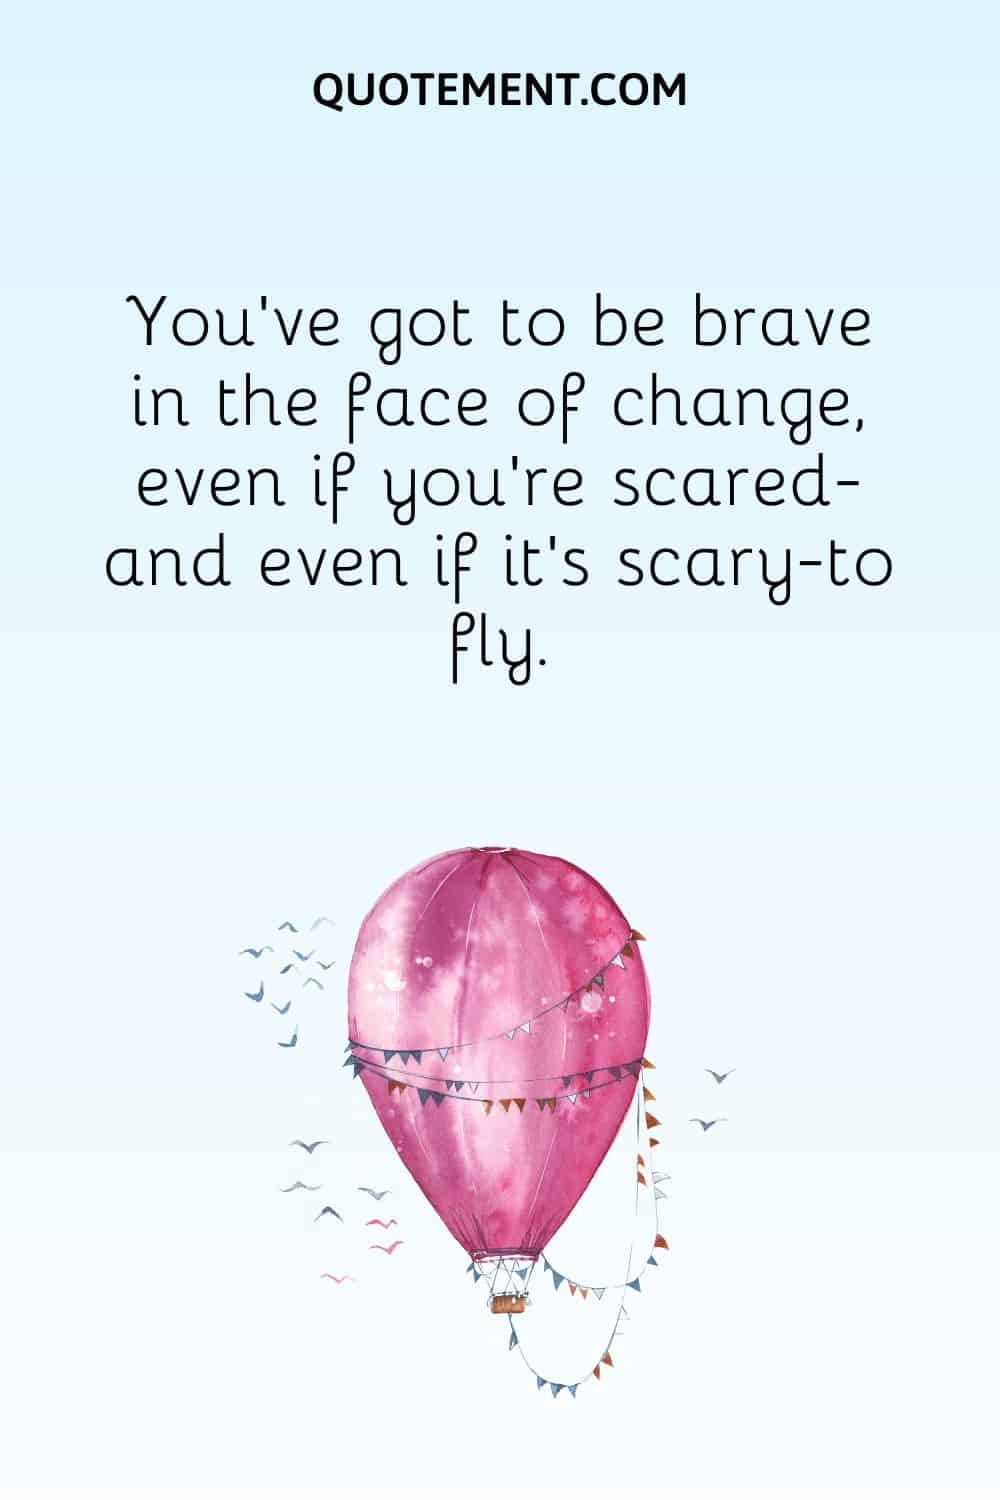 You’ve got to be brave in the face of change, even if you’re scared—and even if it’s scary—to fly.